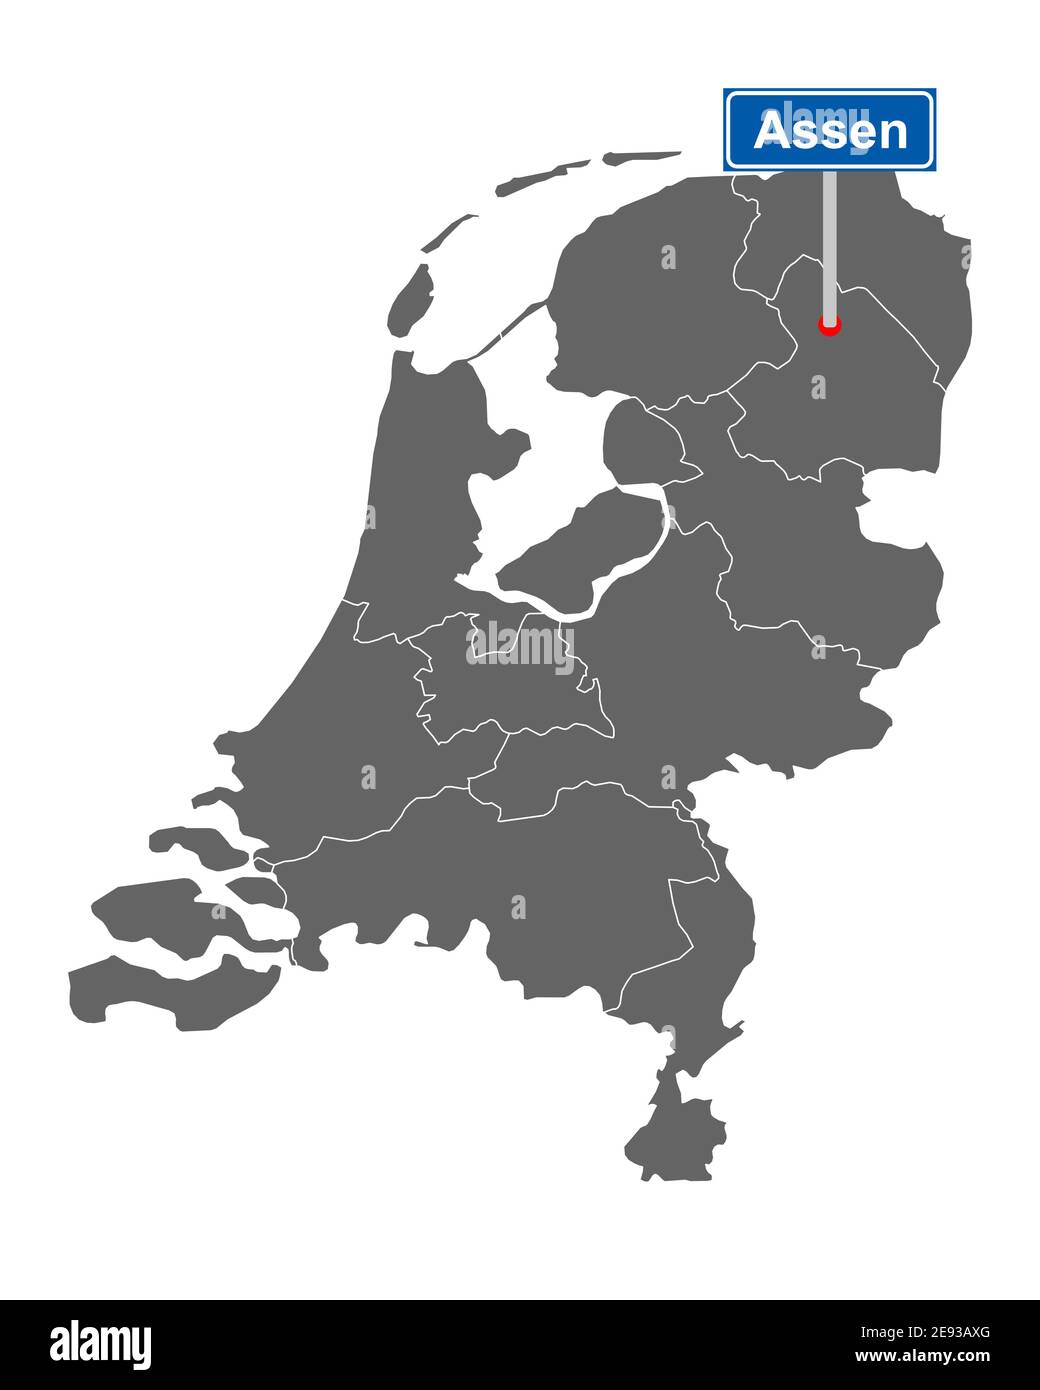 Map of the Netherlands with road sign Assen Stock Photo